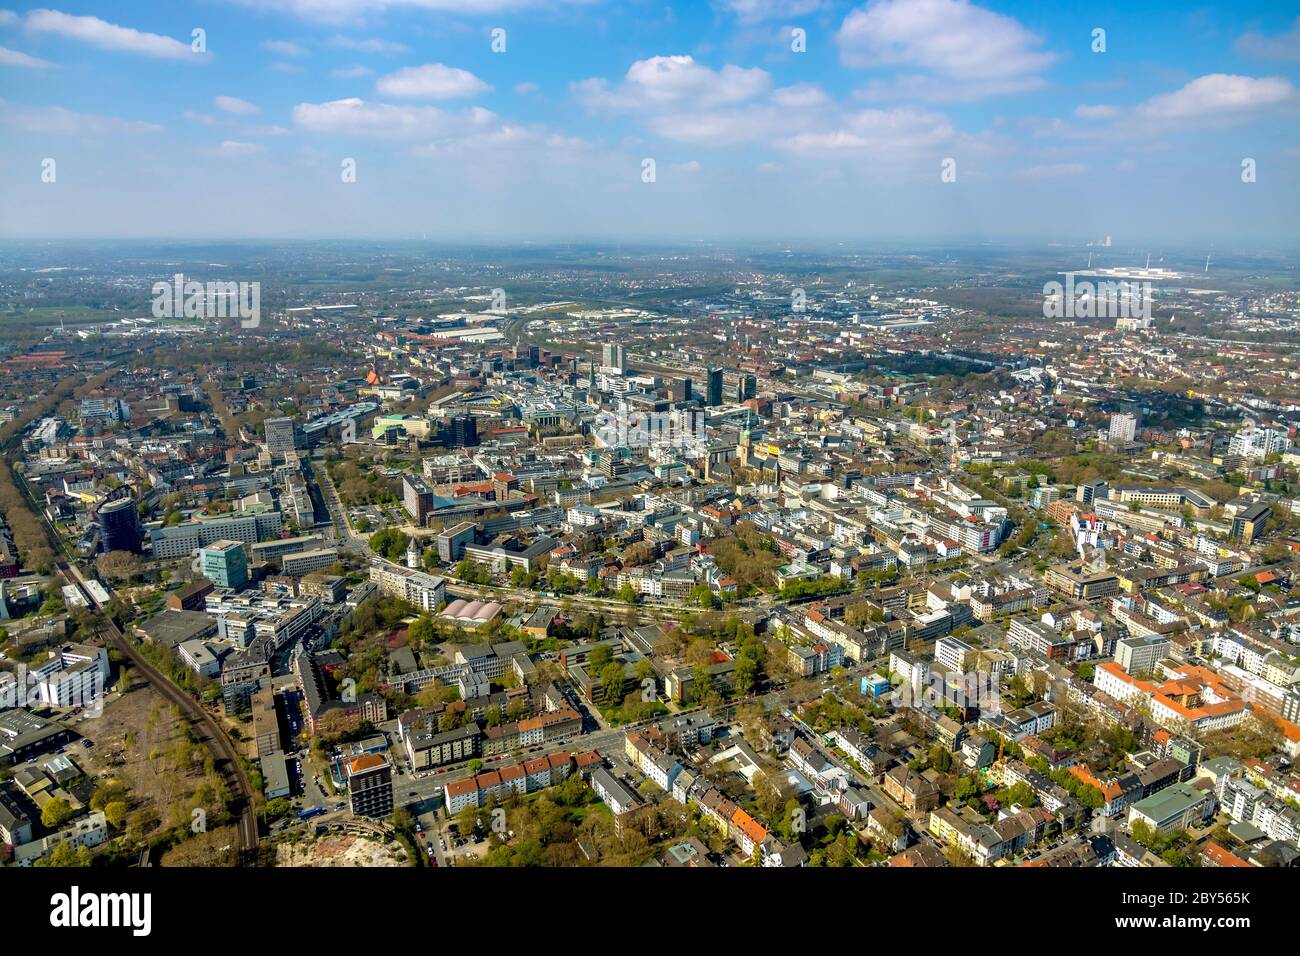 inner city of Dortmund seen from the east, 10.04.2020, aerial view, Germany, North Rhine-Westphalia, Ruhr Area, Dortmund Stock Photo